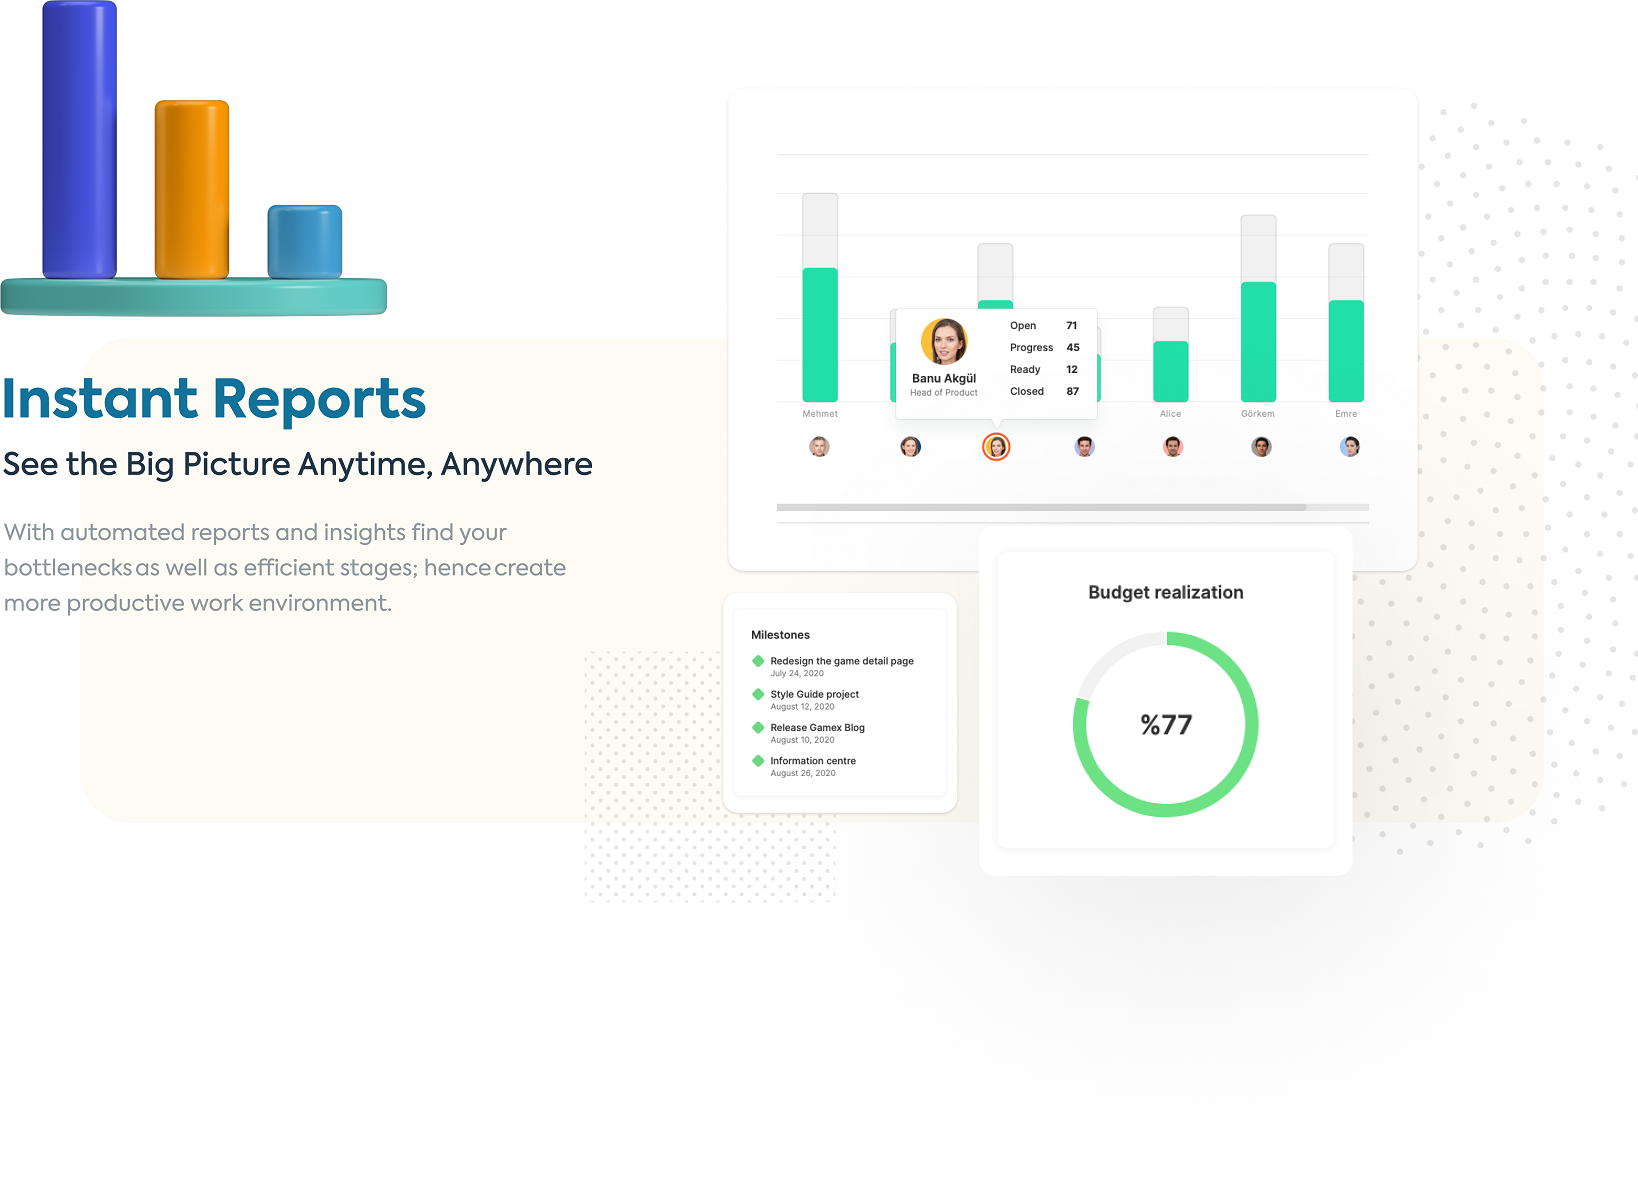 Instant Reports See the Big Picture Anytime, Anywhere With automated reports and insights find your bottlenecks as well as efficient stages; hence create more productive enviroment.